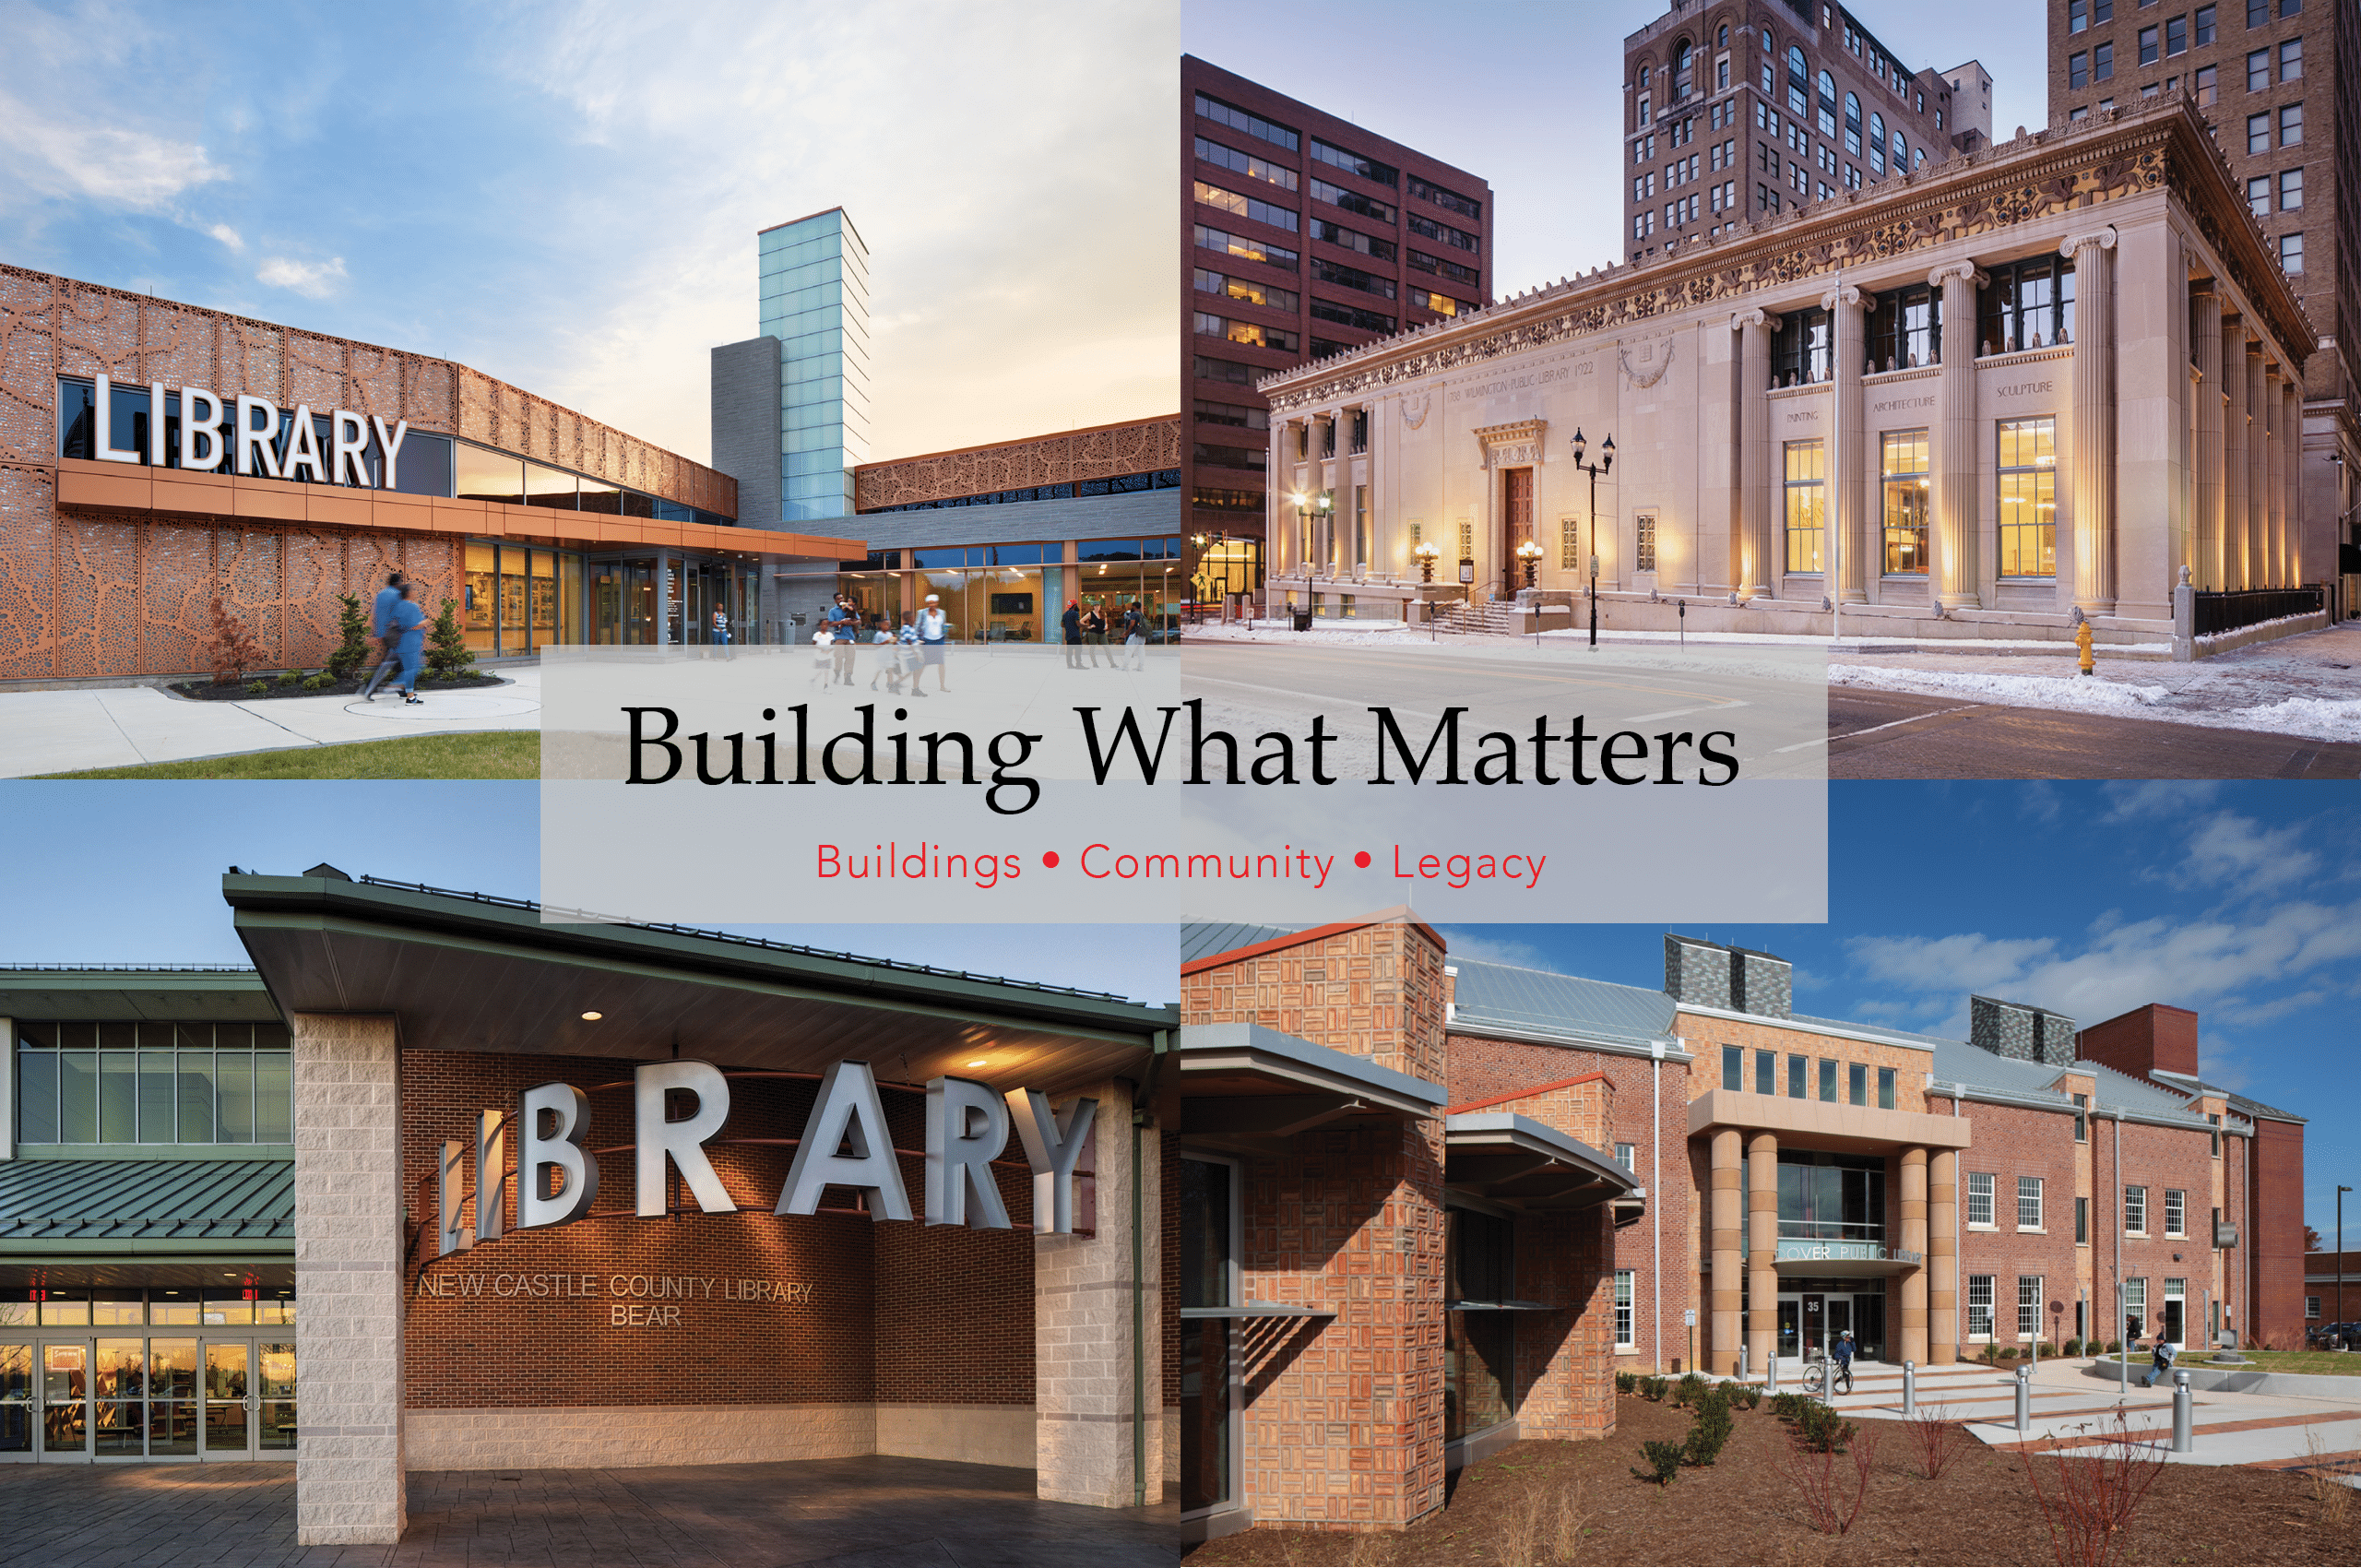 Building a Modern Library for Today’s Community – How Libraries and Communities Intersect